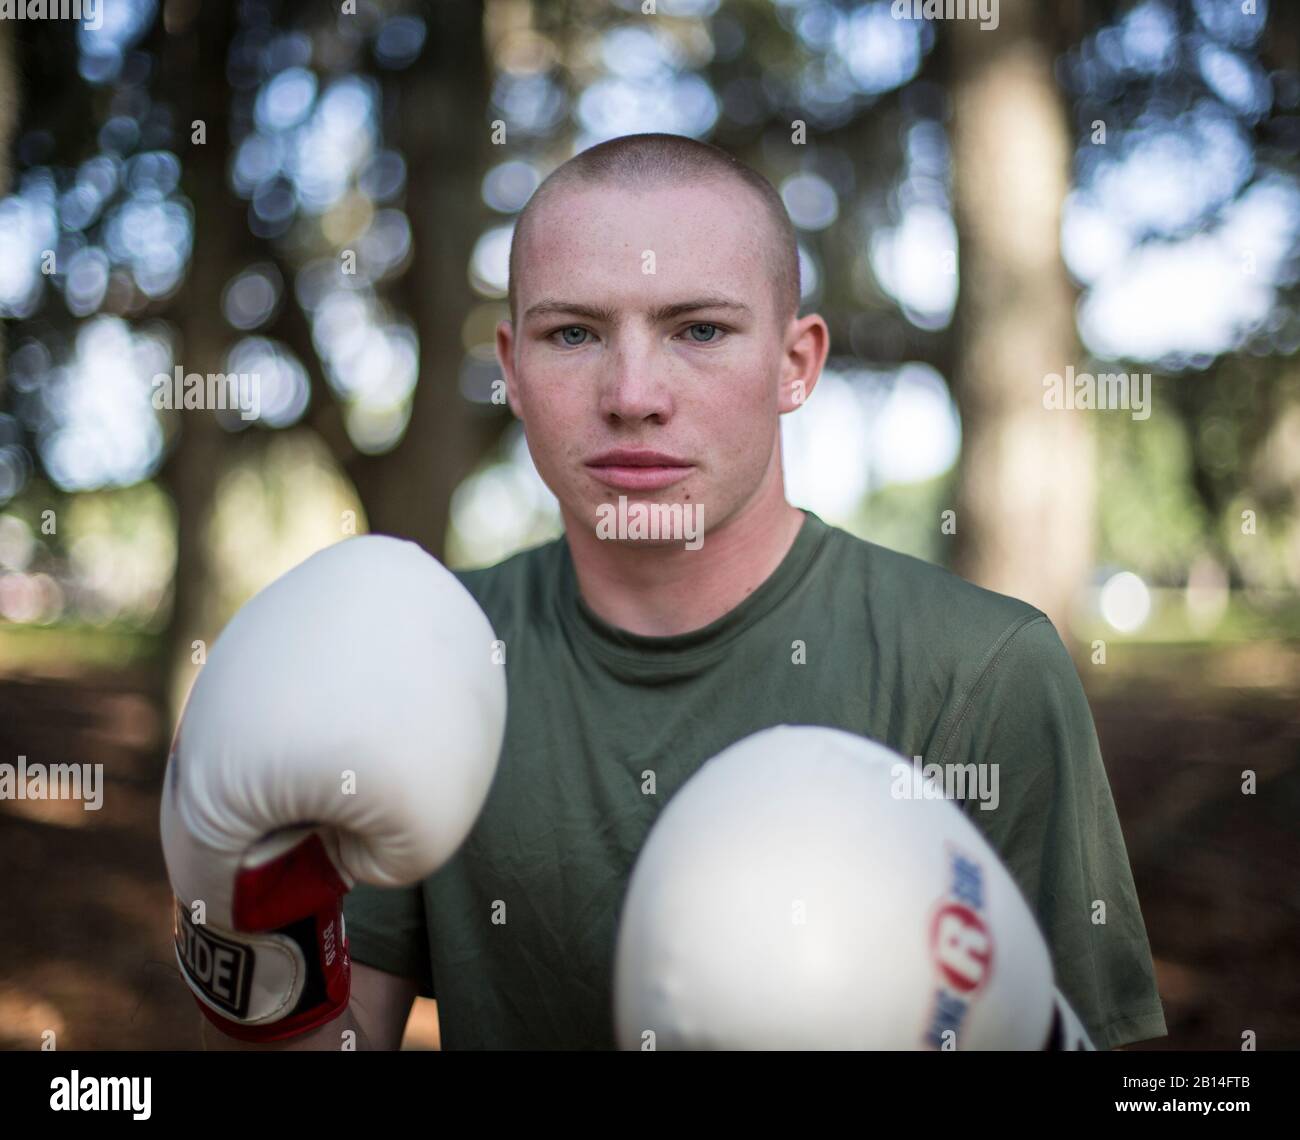 Nathan Hellams, from Liberty, S.C., a Recruit with Golf Company, 2nd Recruit Training Battalion, prepares to body spar at Marine Corps Recruit Depot Parris Island, S.C., July 11, 2019. Body sparring is an exercise that exemplifies the fundamentals of Marine Corps Martial Arts and forces recruits to overcome physical exhaustion and mental fatigue. (U.S. Marine Corps photo by Lance Cpl. Christopher McMurry) Stock Photo